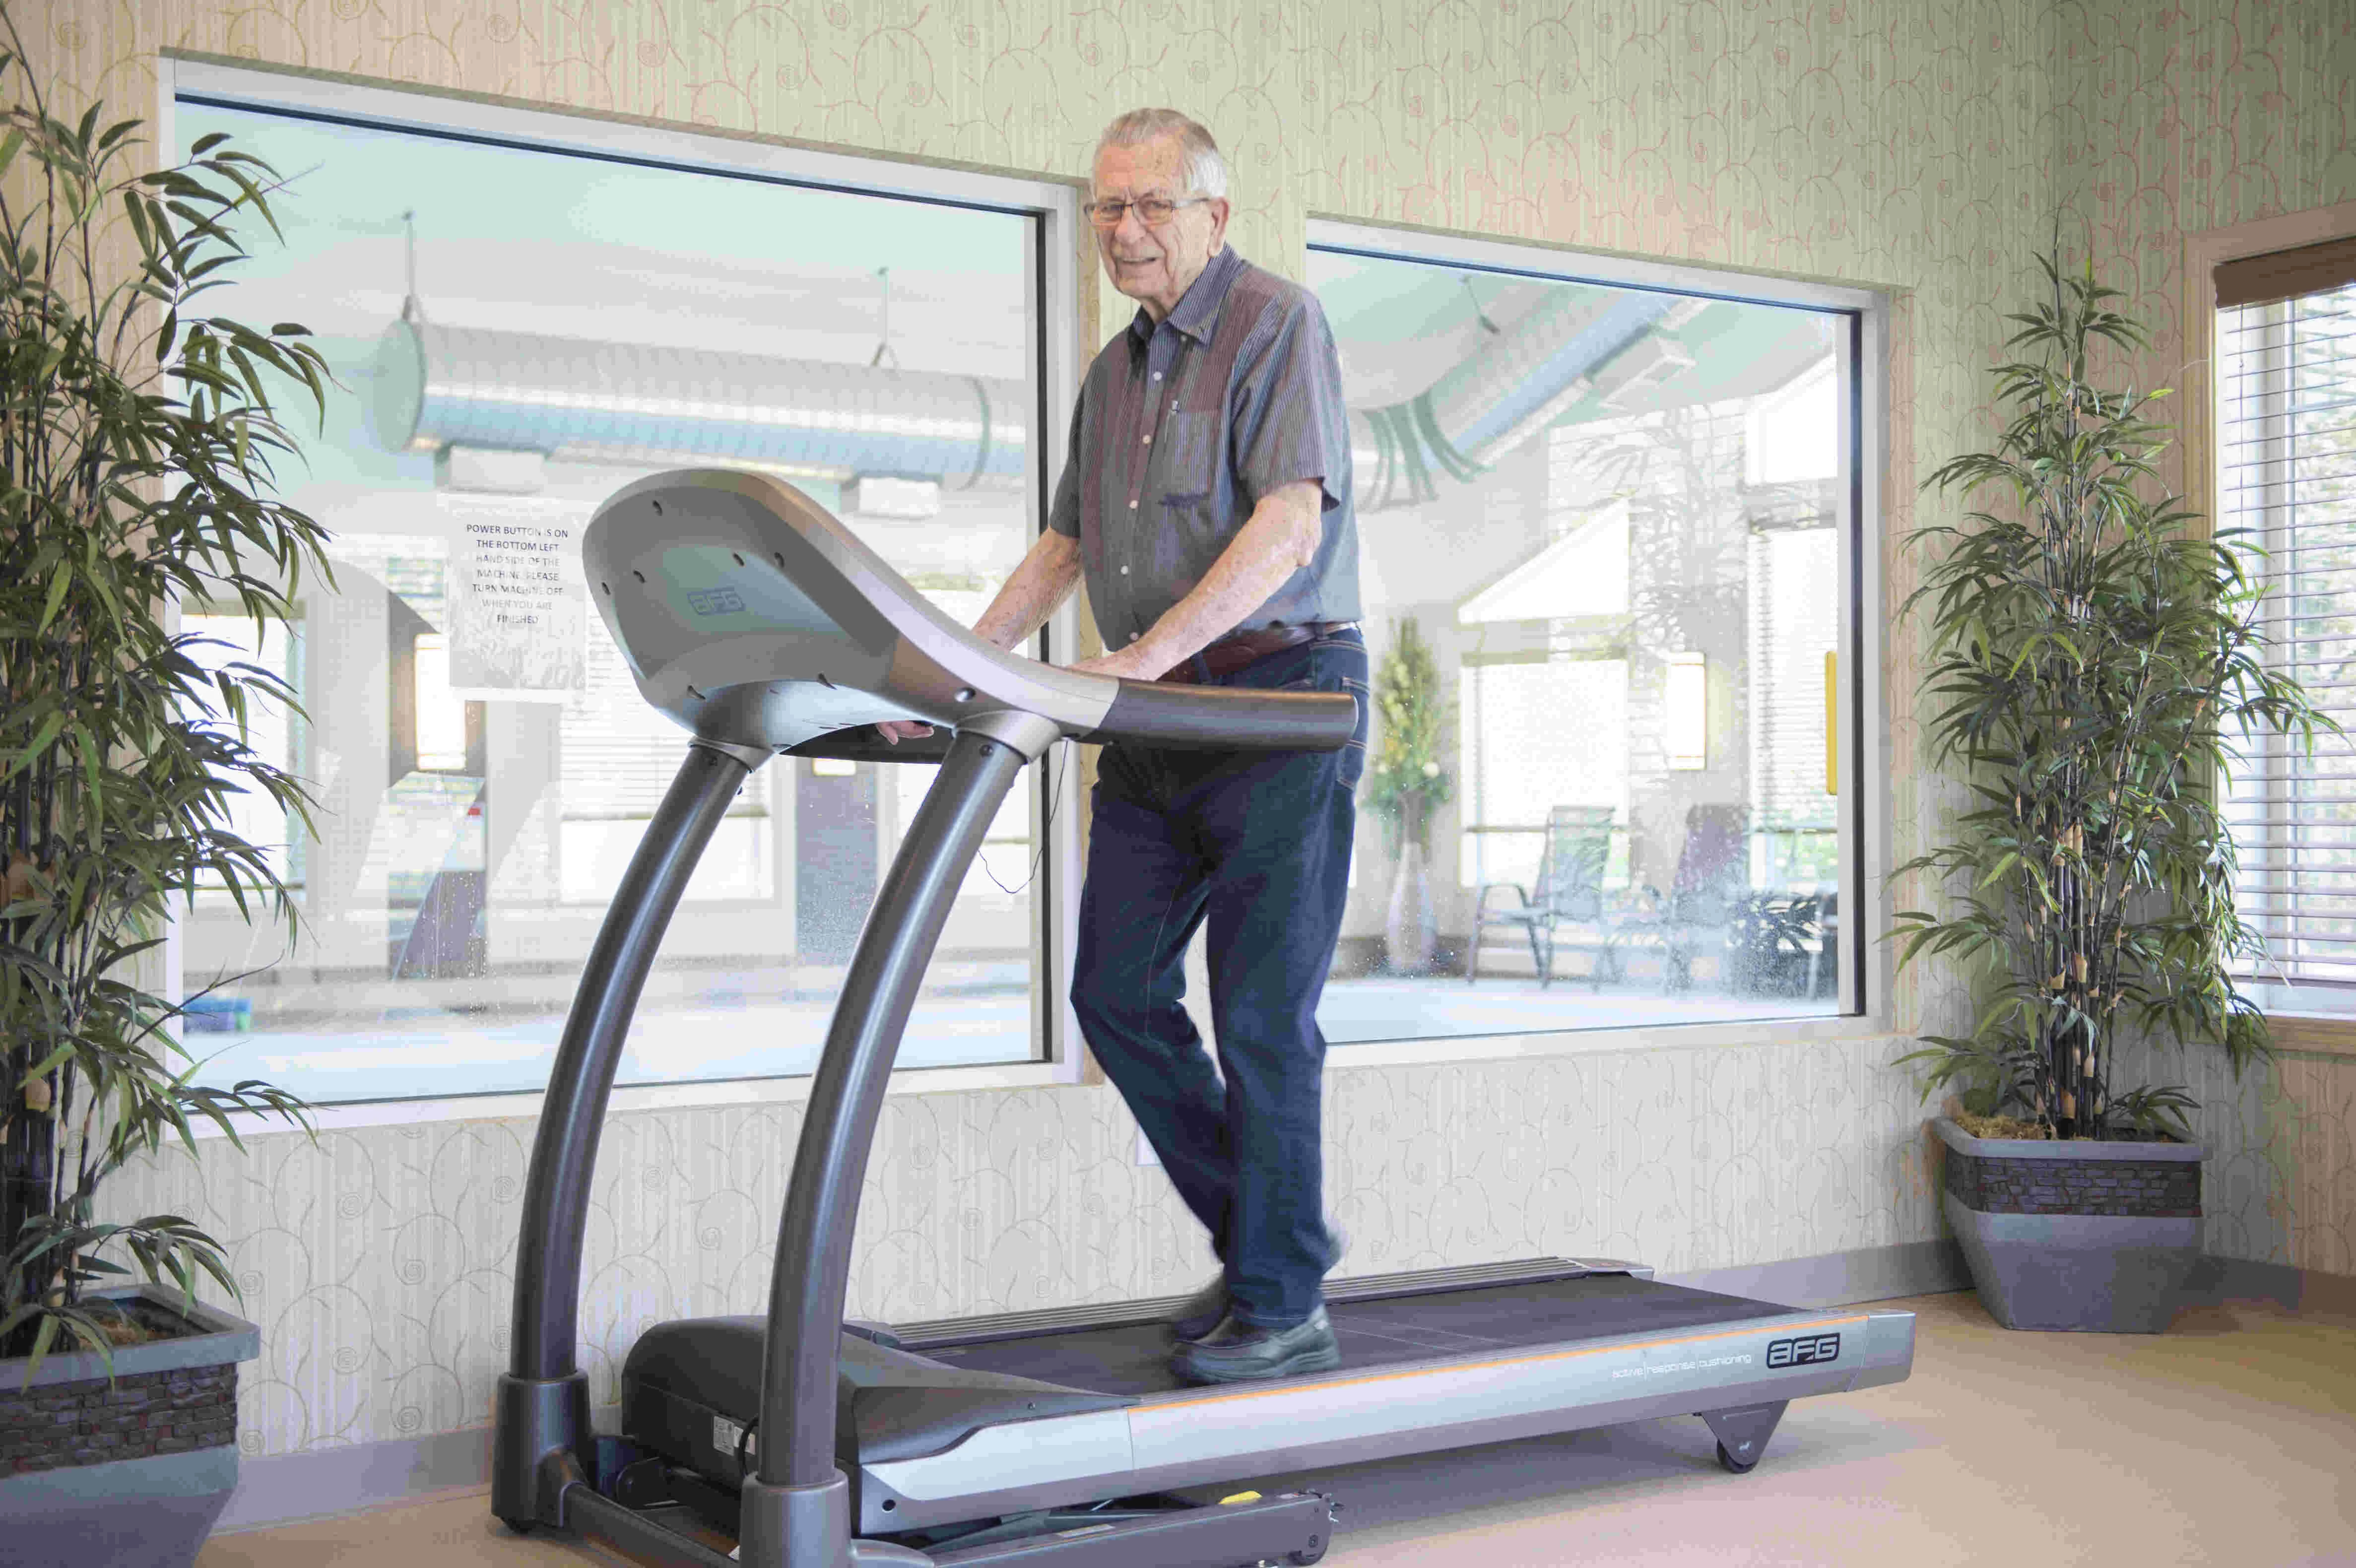 An elderly man walking on a treadmill and exercise programs for seniors